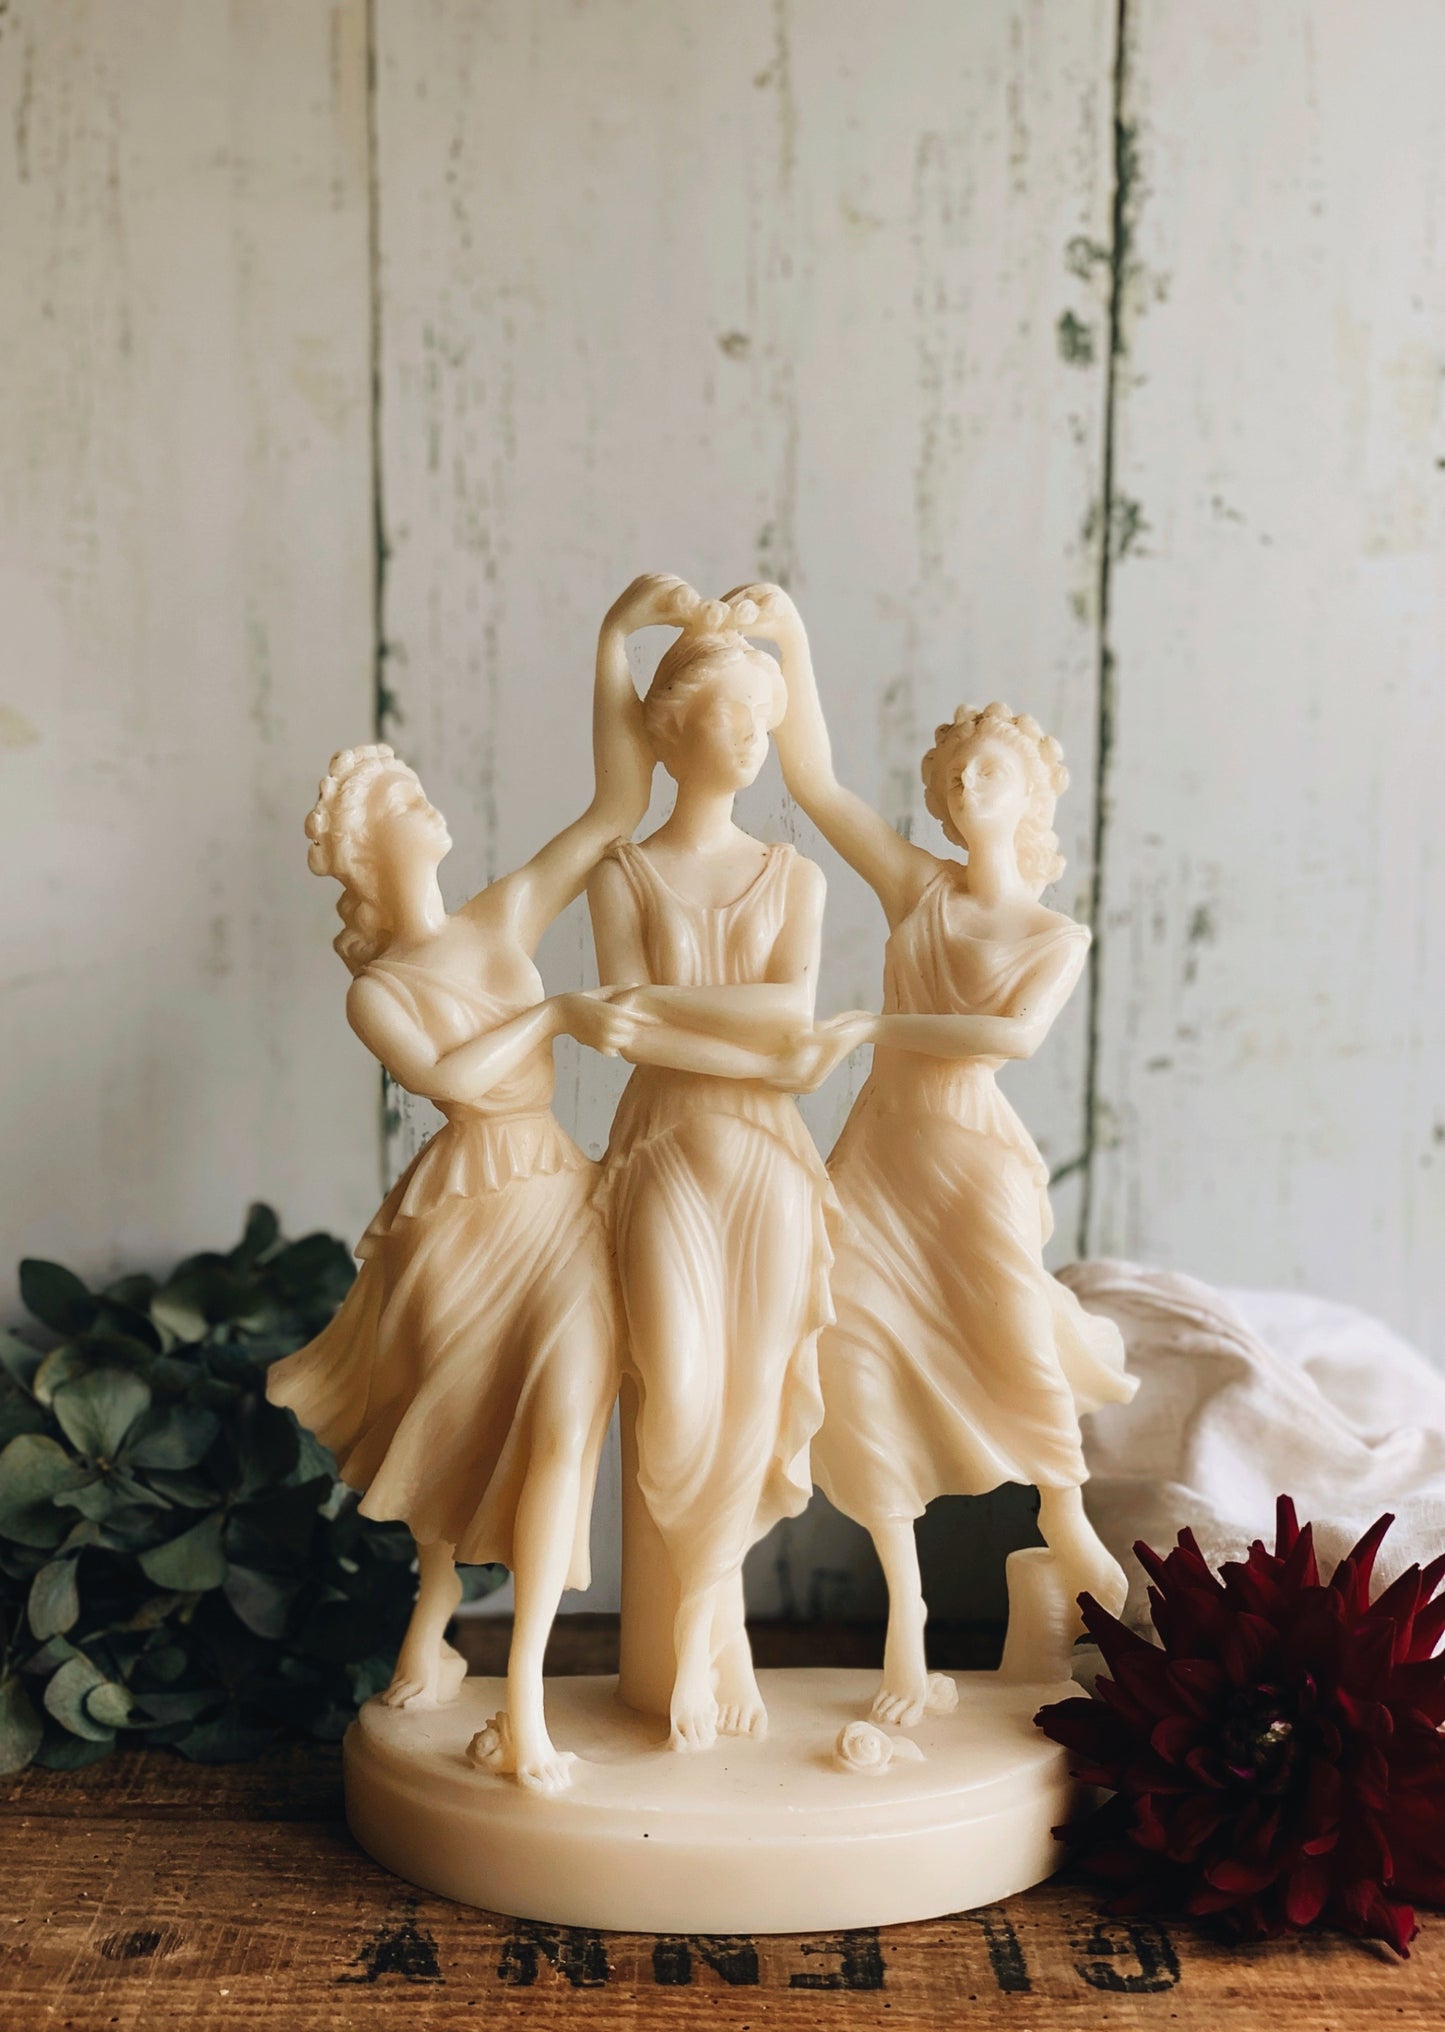 Vintage Figurine Resin “roses in the hair and dancing” Ornament